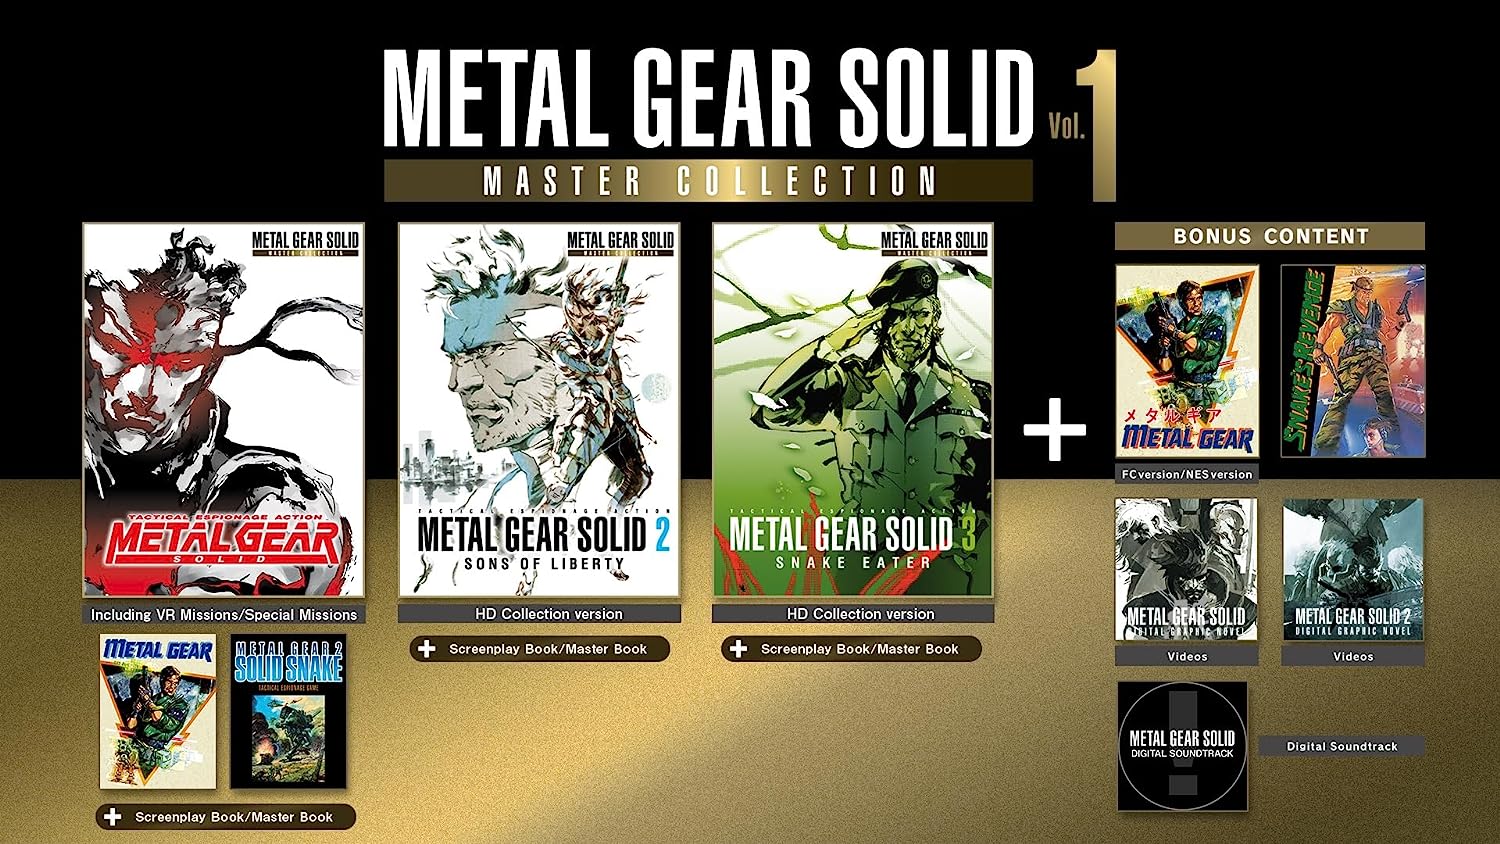 Metal Gear Solid: Master Collection Vol. 1 (PlayStation 5)